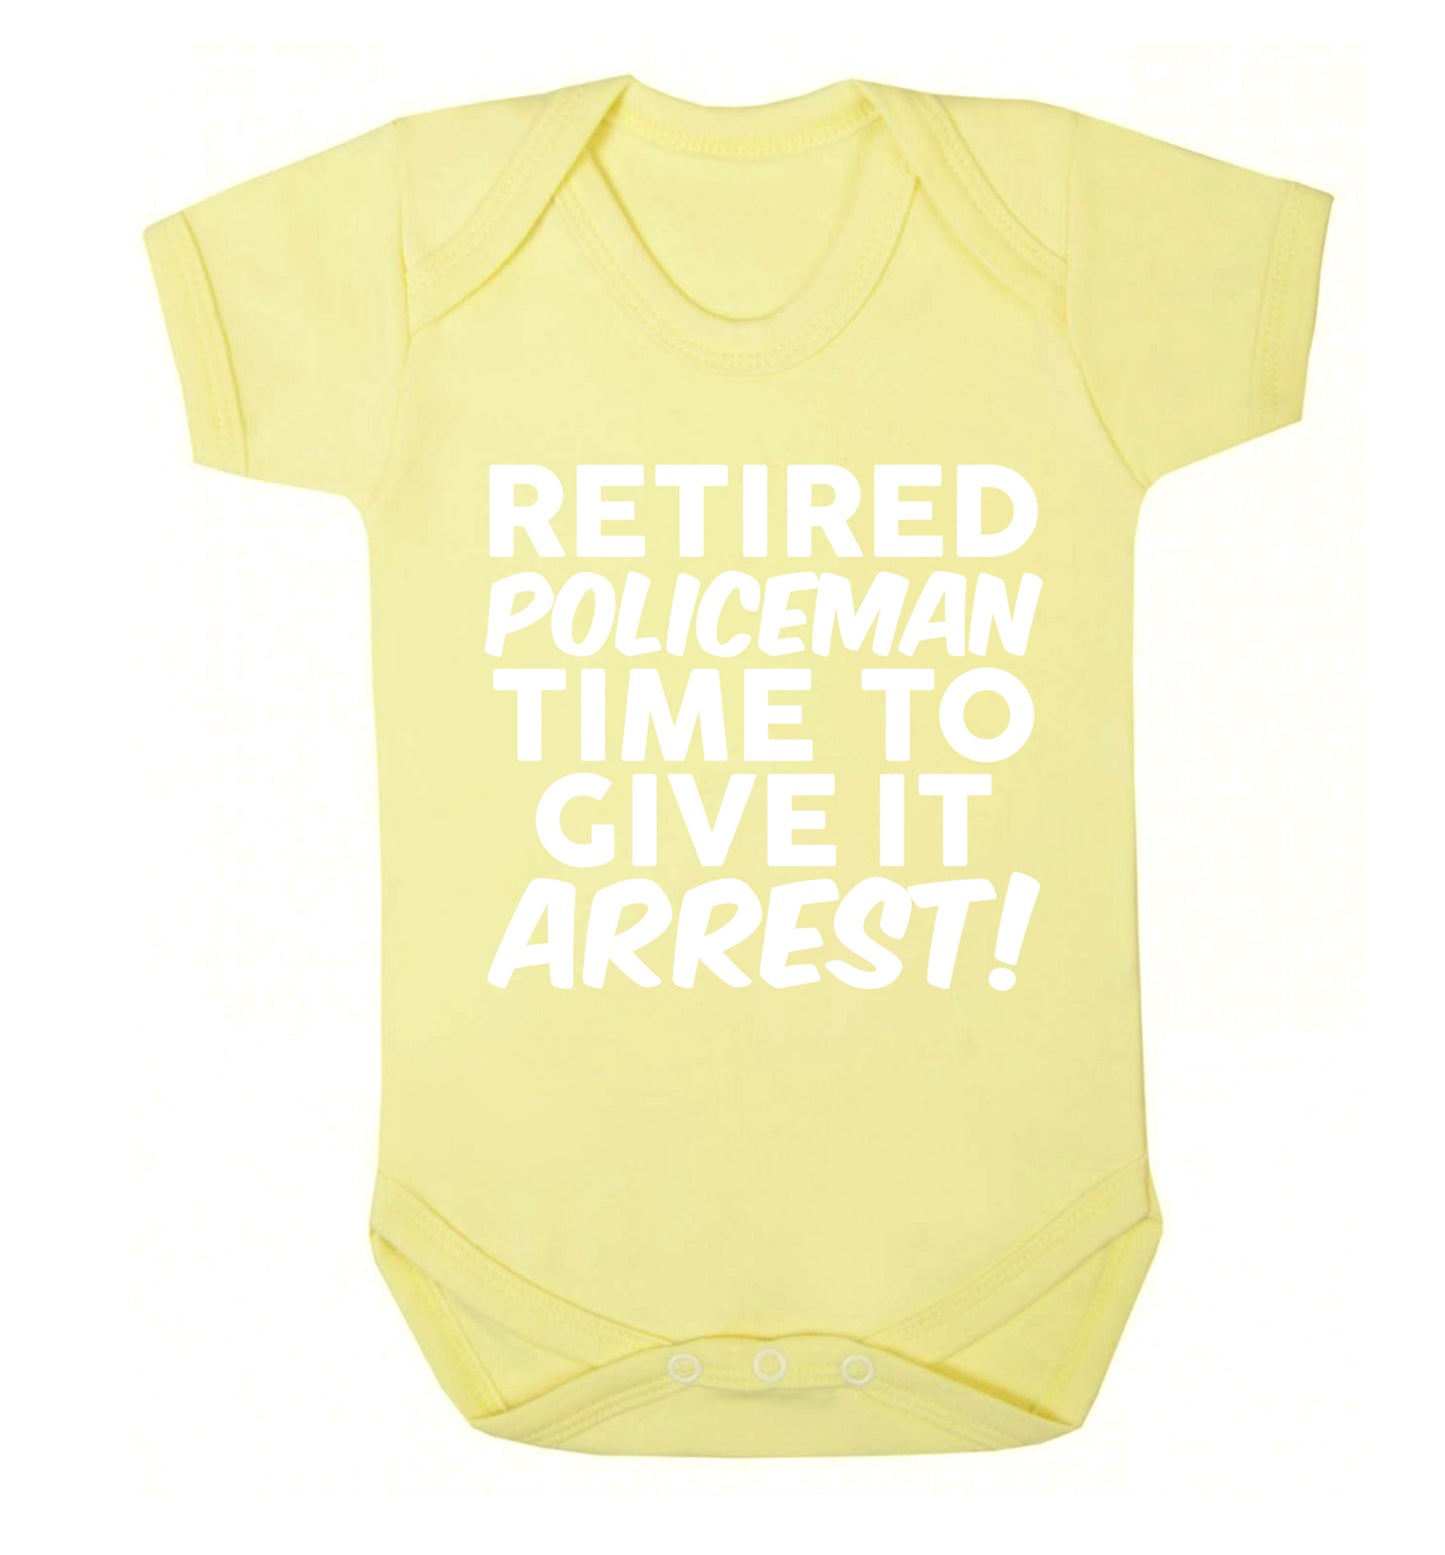 Retired policeman give it arresst! Baby Vest pale yellow 18-24 months